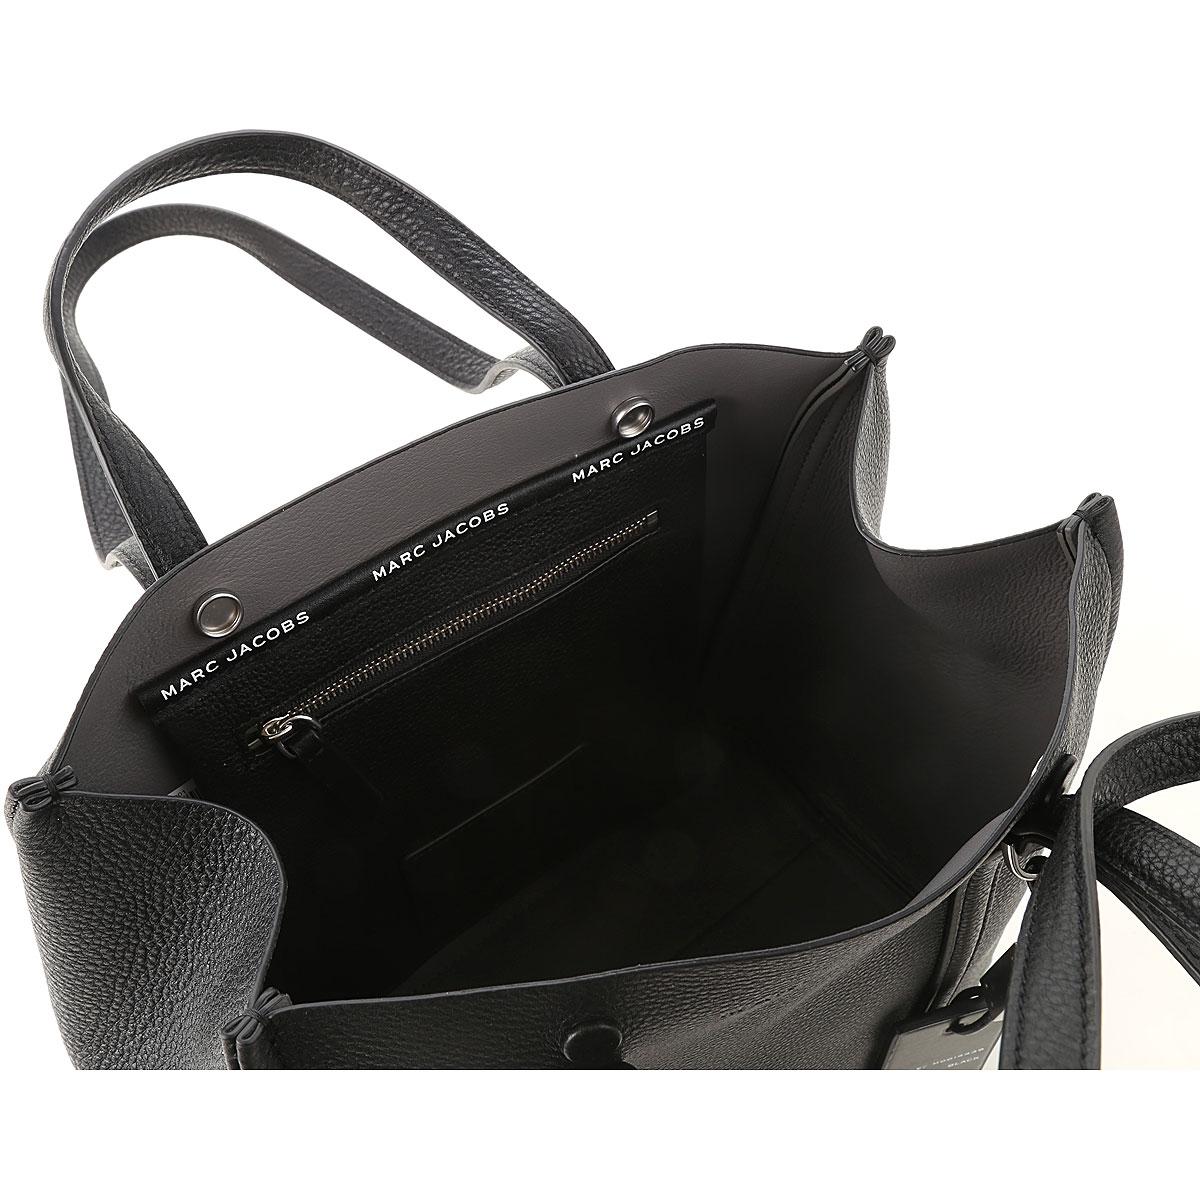 Marc Jacobs Tote Bag On Sale in Black - Lyst